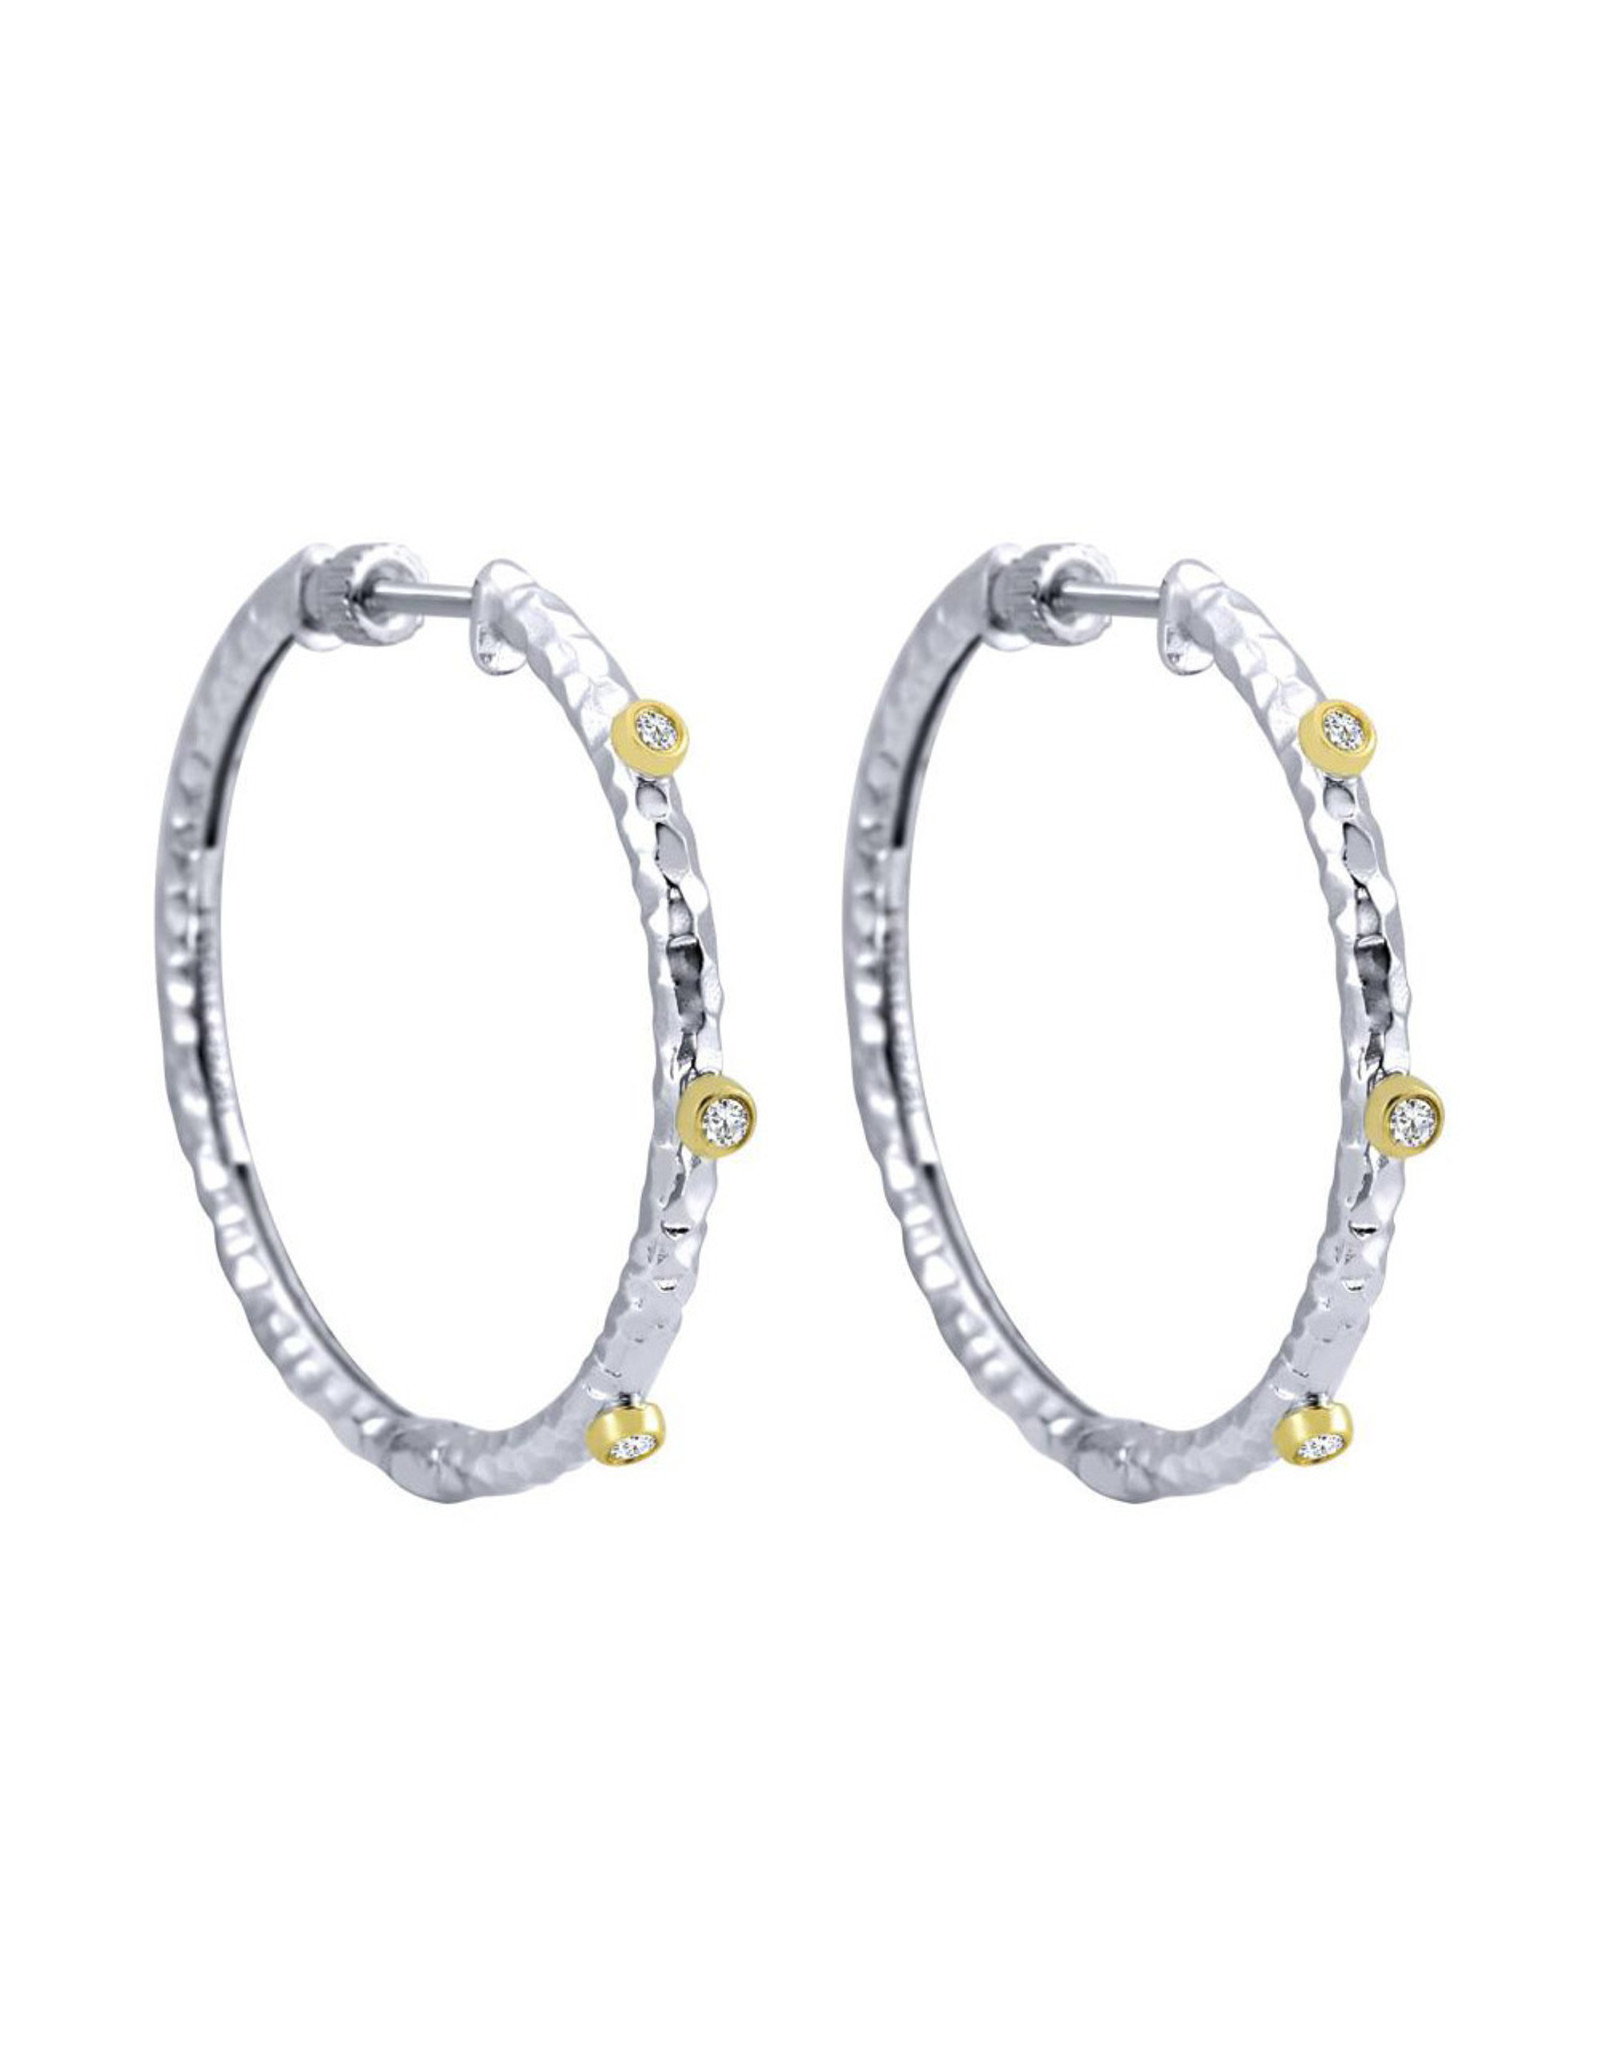 925 & 18K Yellow Gold Hammered Hoop Earrings, D: 0.07cts